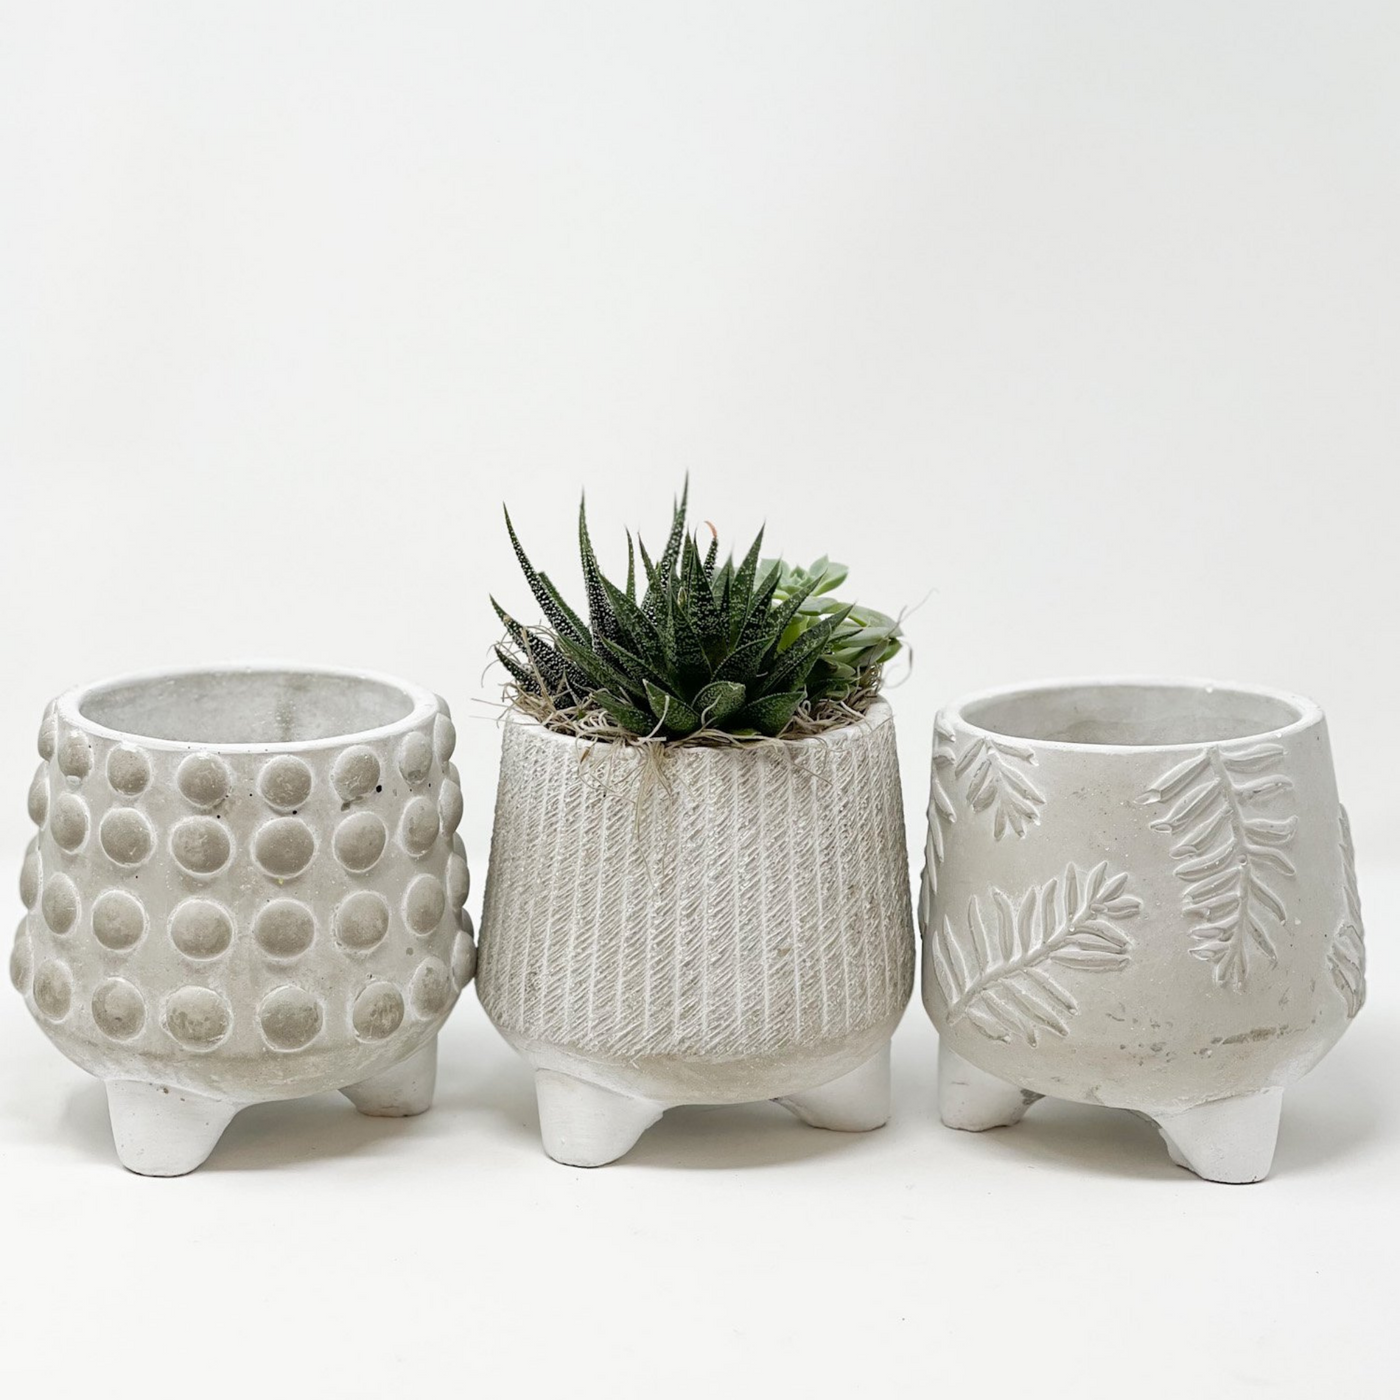 Cement pot with variety styles